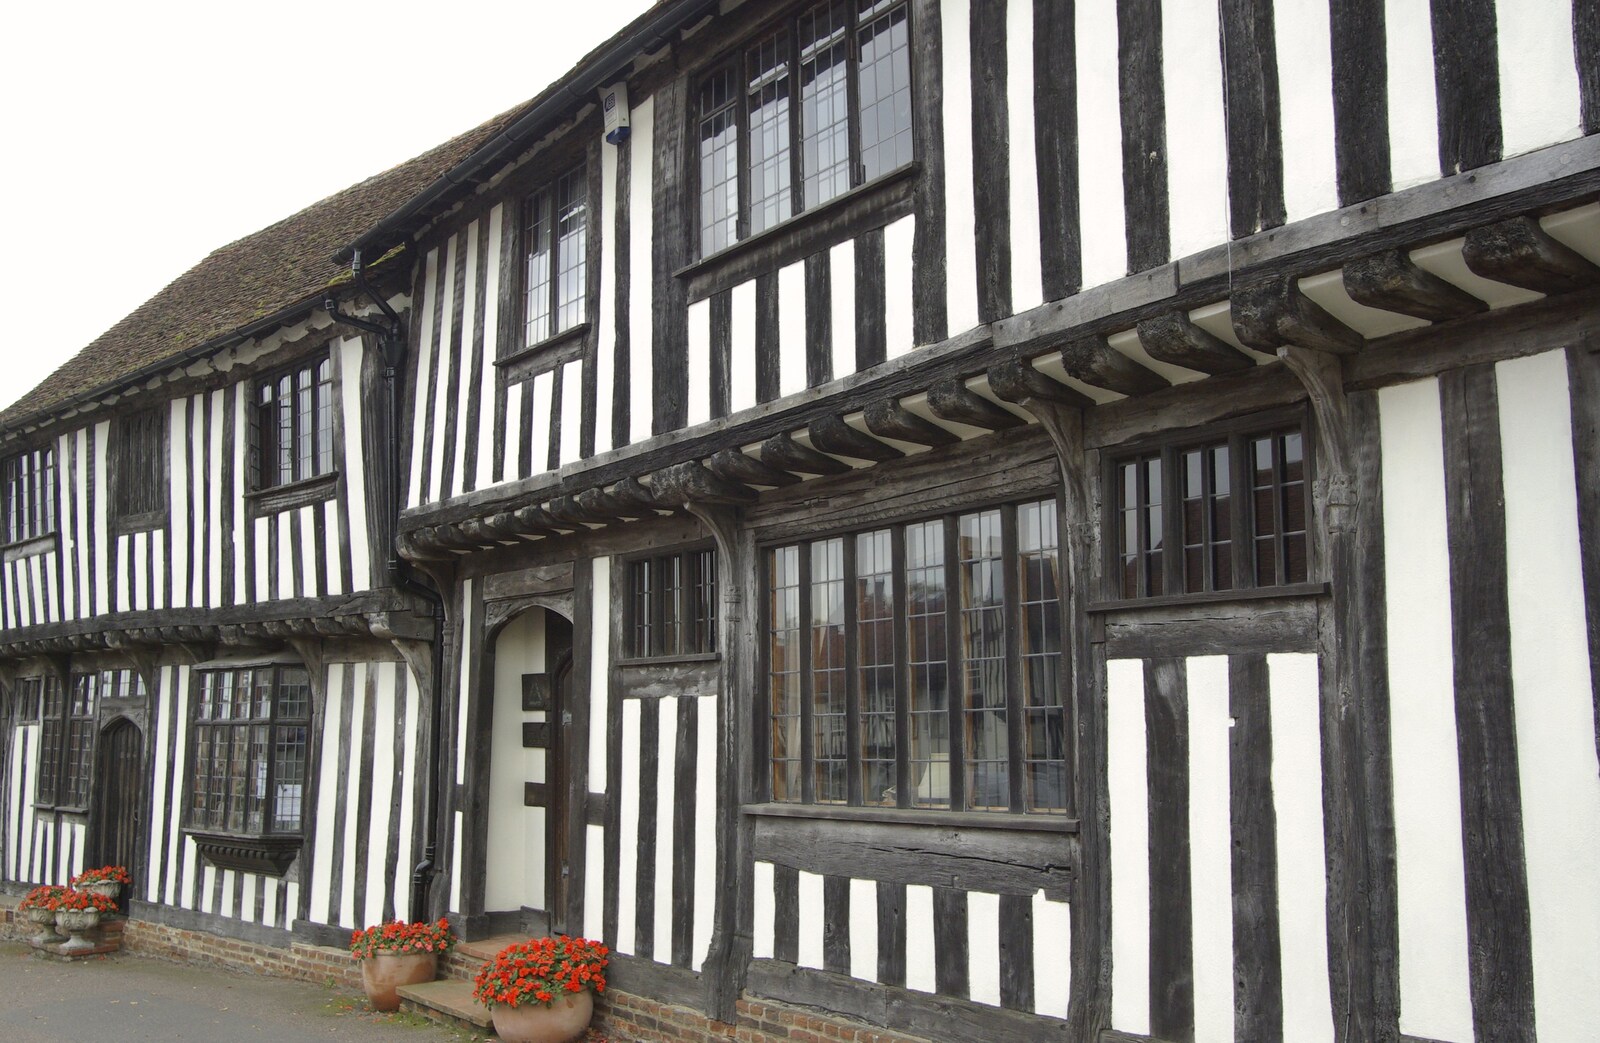 A Road Trip in an MX-5, and Athlete at the UEA, Lavenham and Norwich - 14th October 2007: Timber-framed building in Lavenham